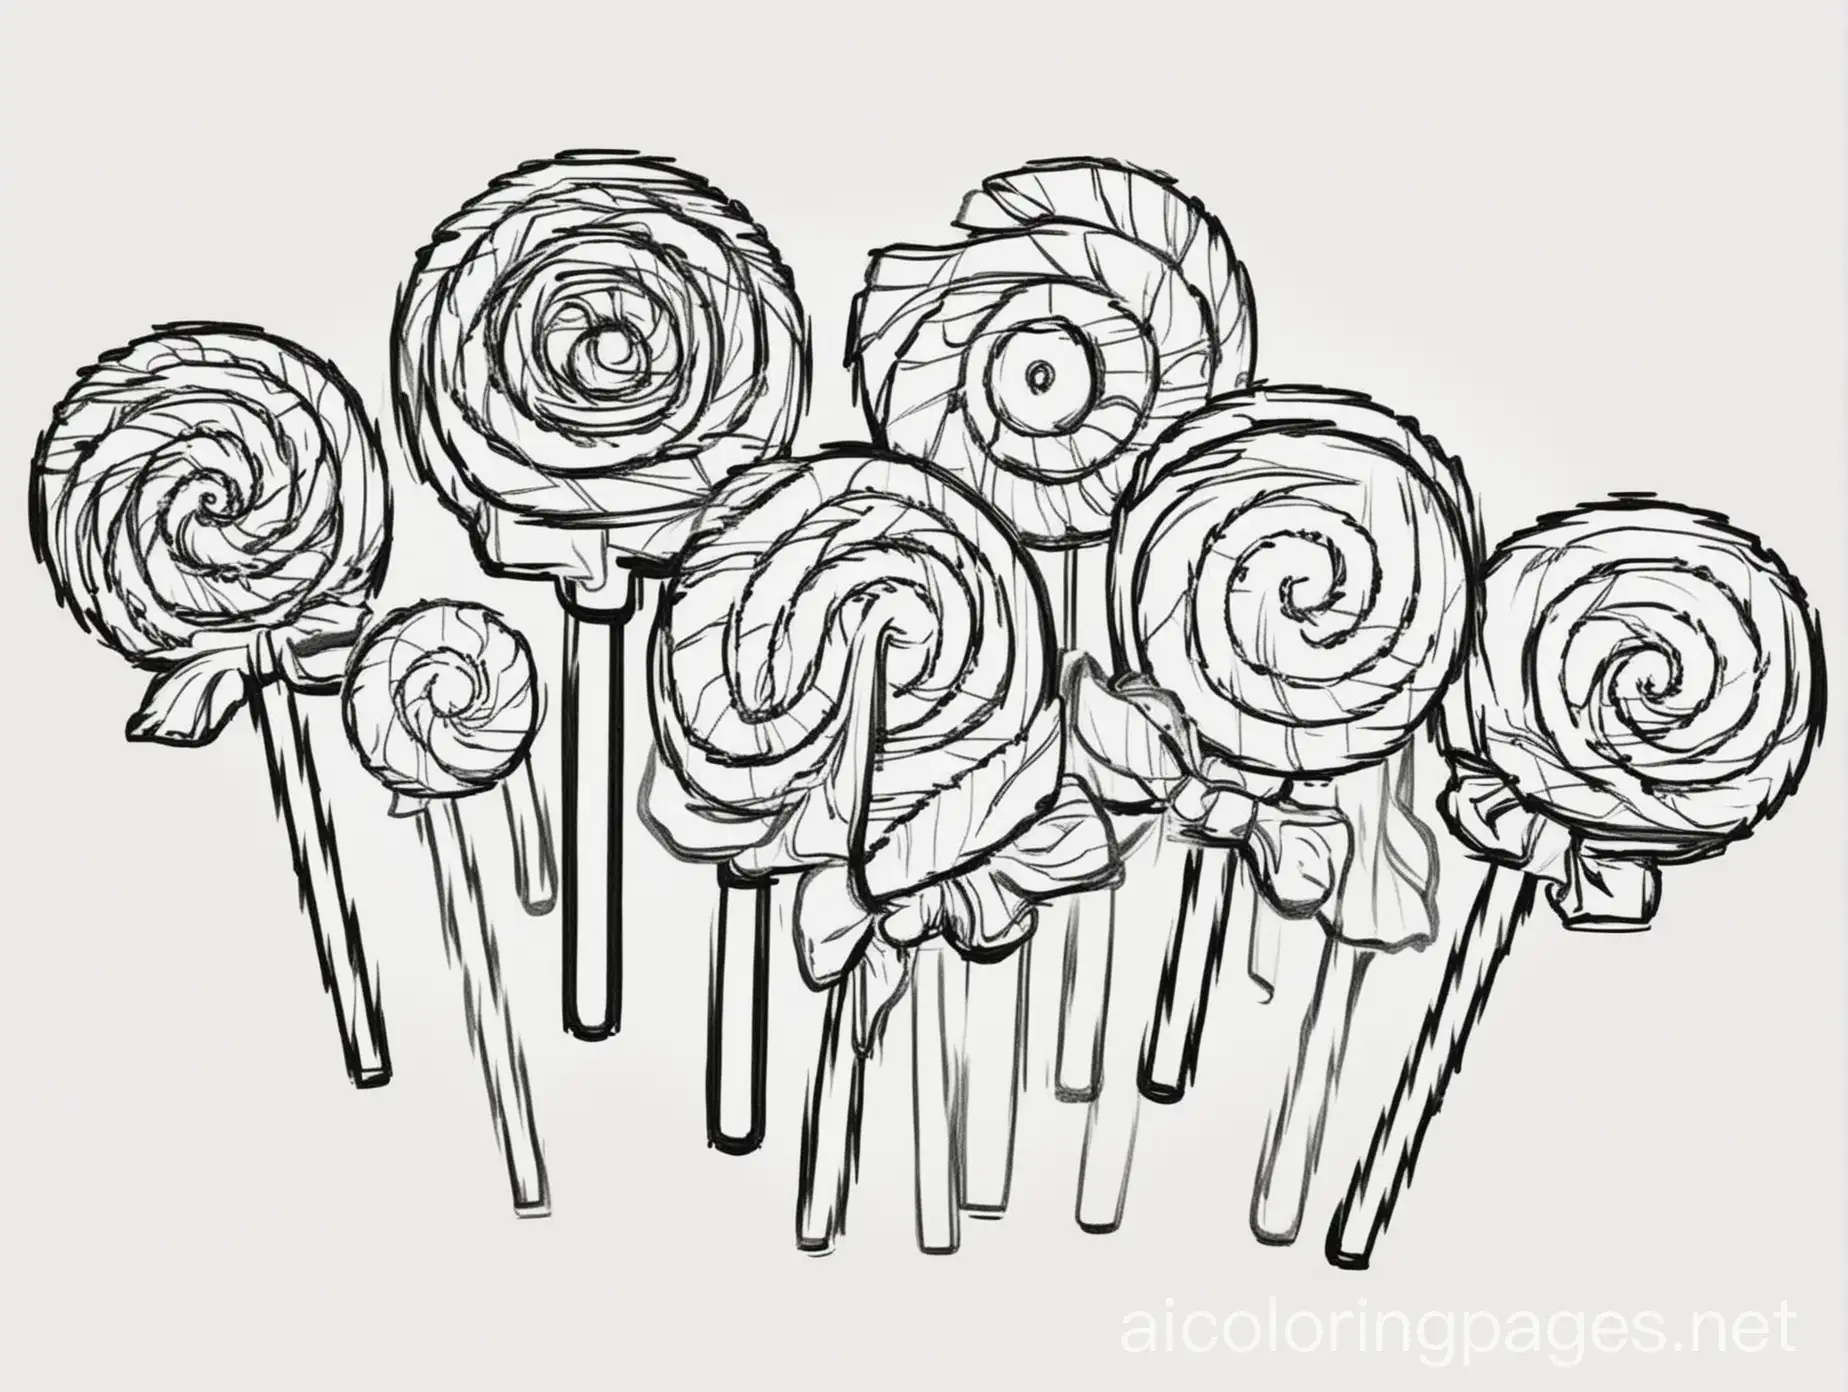 cartoon outlined only in black line of An assortment of candies like lollipops, wrapped candies, and gummies, Coloring Page, black and white, line art, white background, Simplicity, Ample White Space The background of the coloring page is plain white to make it easy for young children to color within the lines. The outlines of all the subjects are easy to distinguish, making it simple for kids to color without too much difficulty